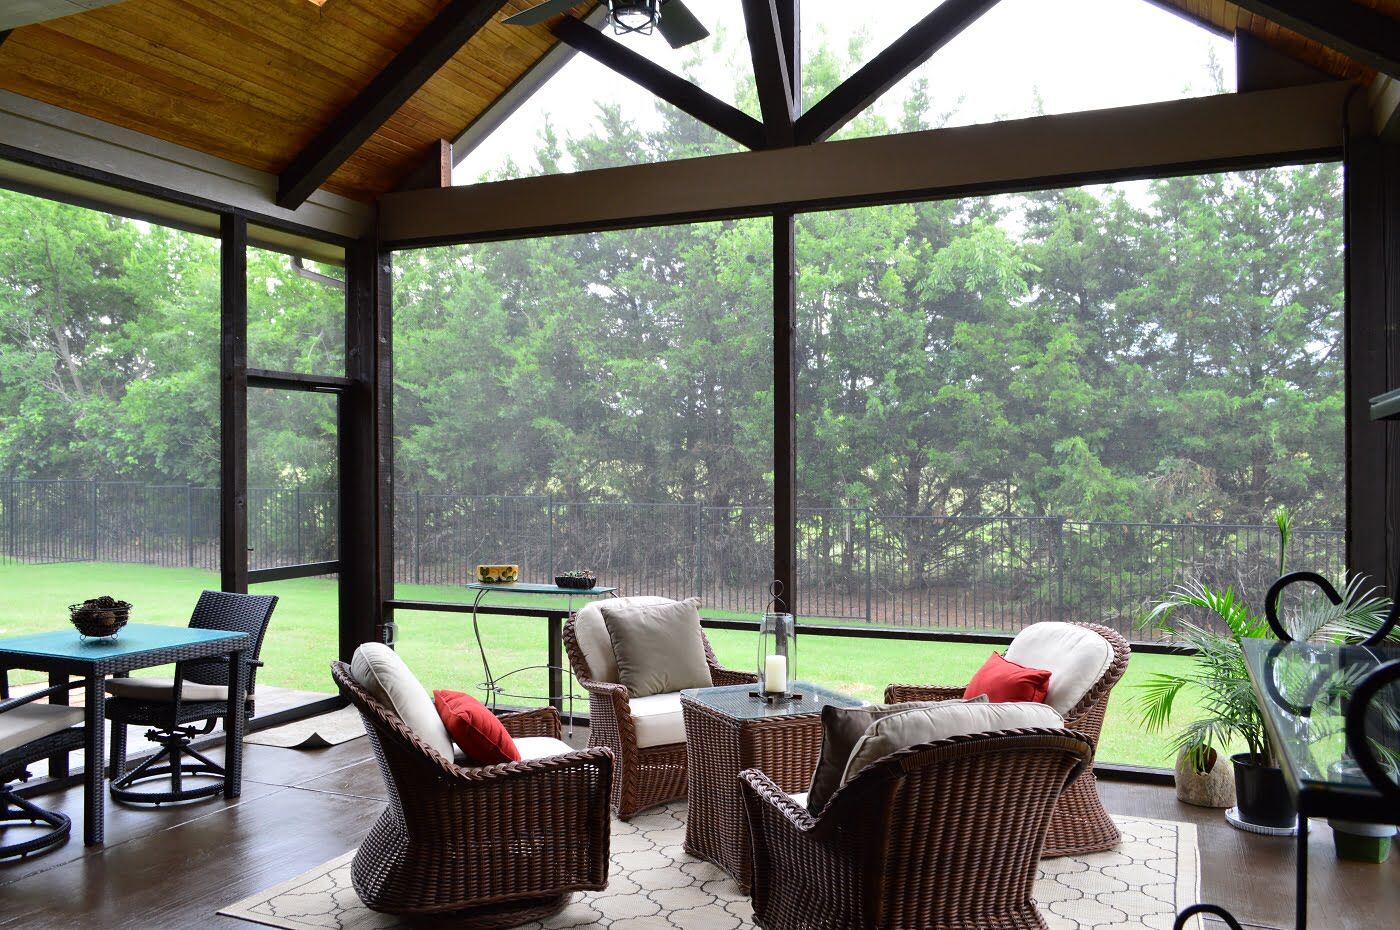 How Much Value Does A Screened Porch Add To A House